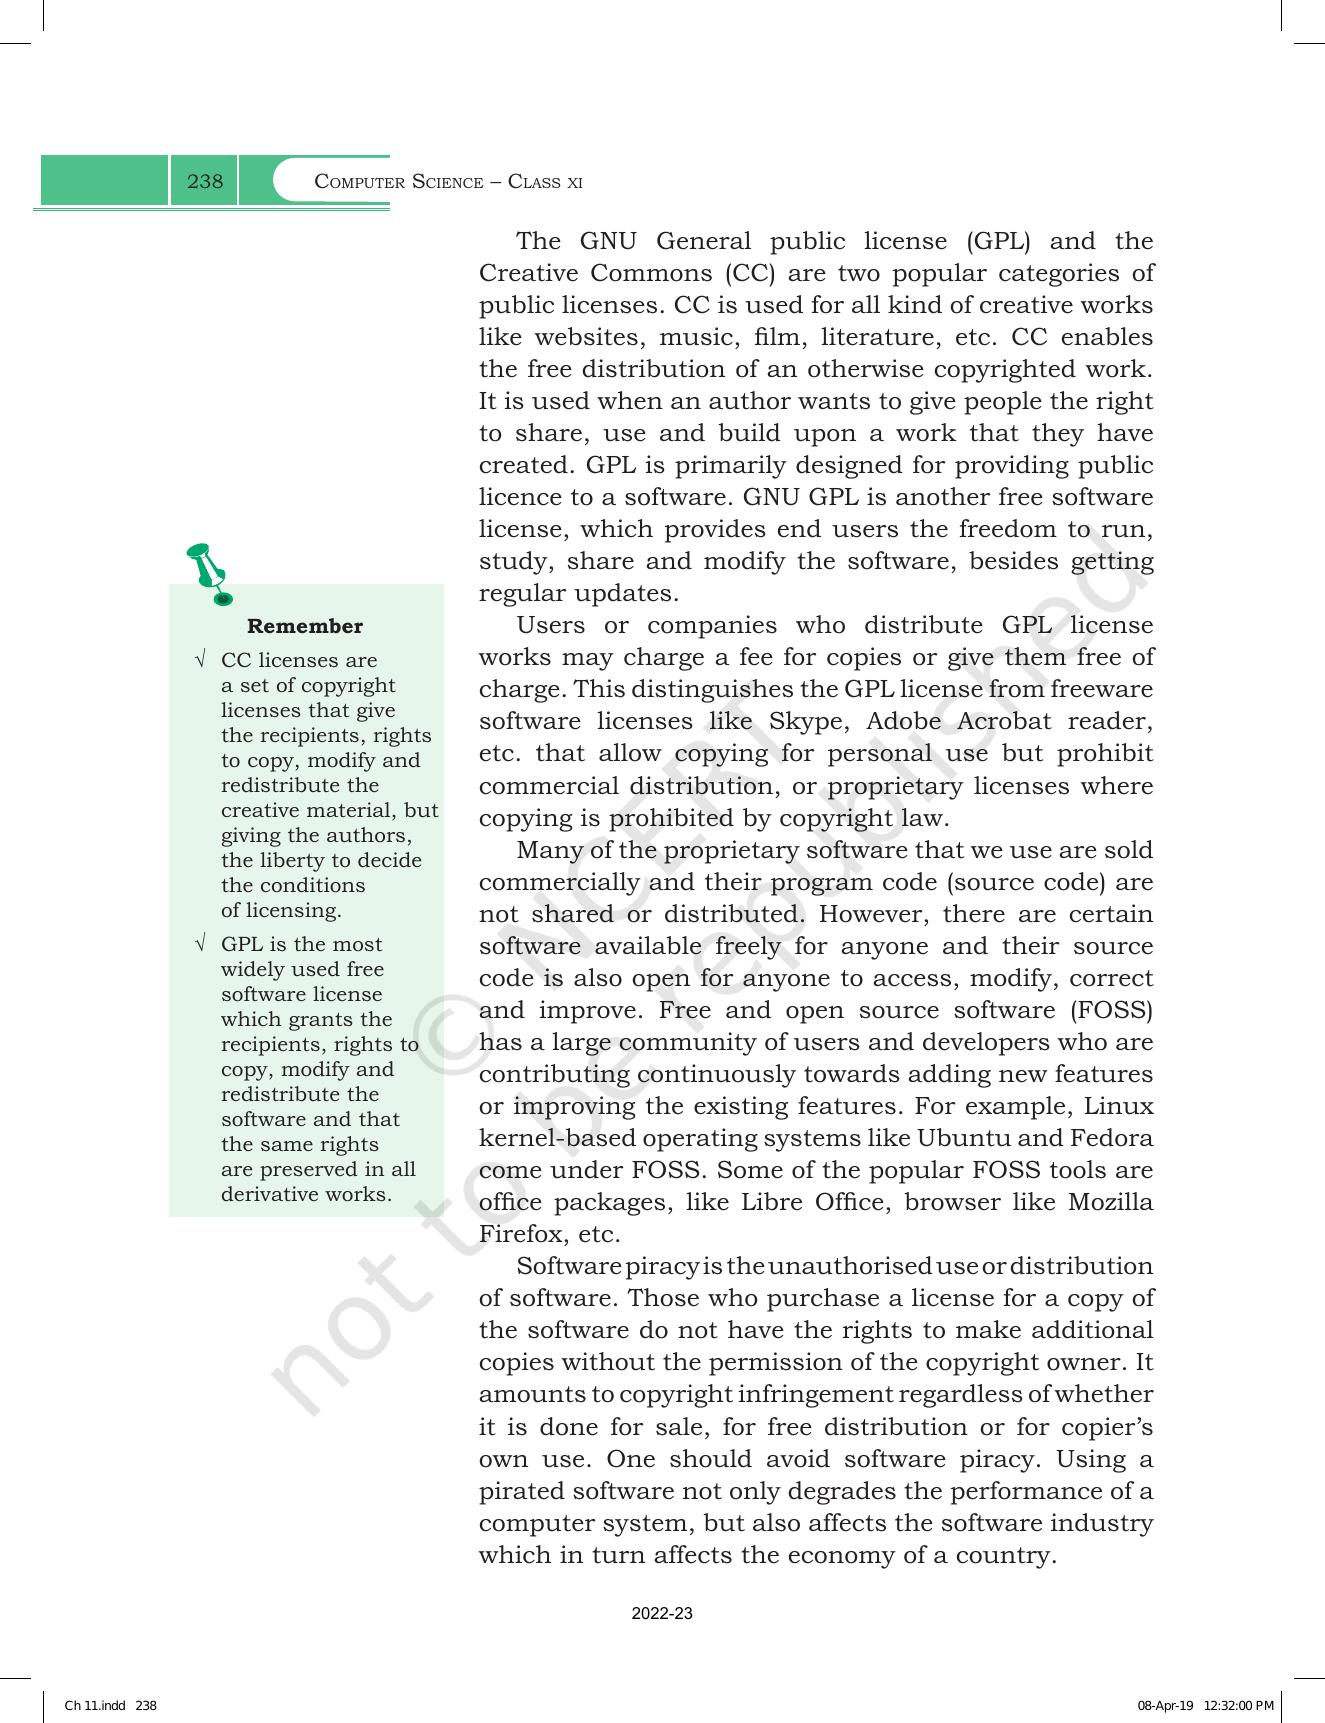 NCERT Book for Class 11 Computer Science Chapter 11 Societal Impact - Page 10